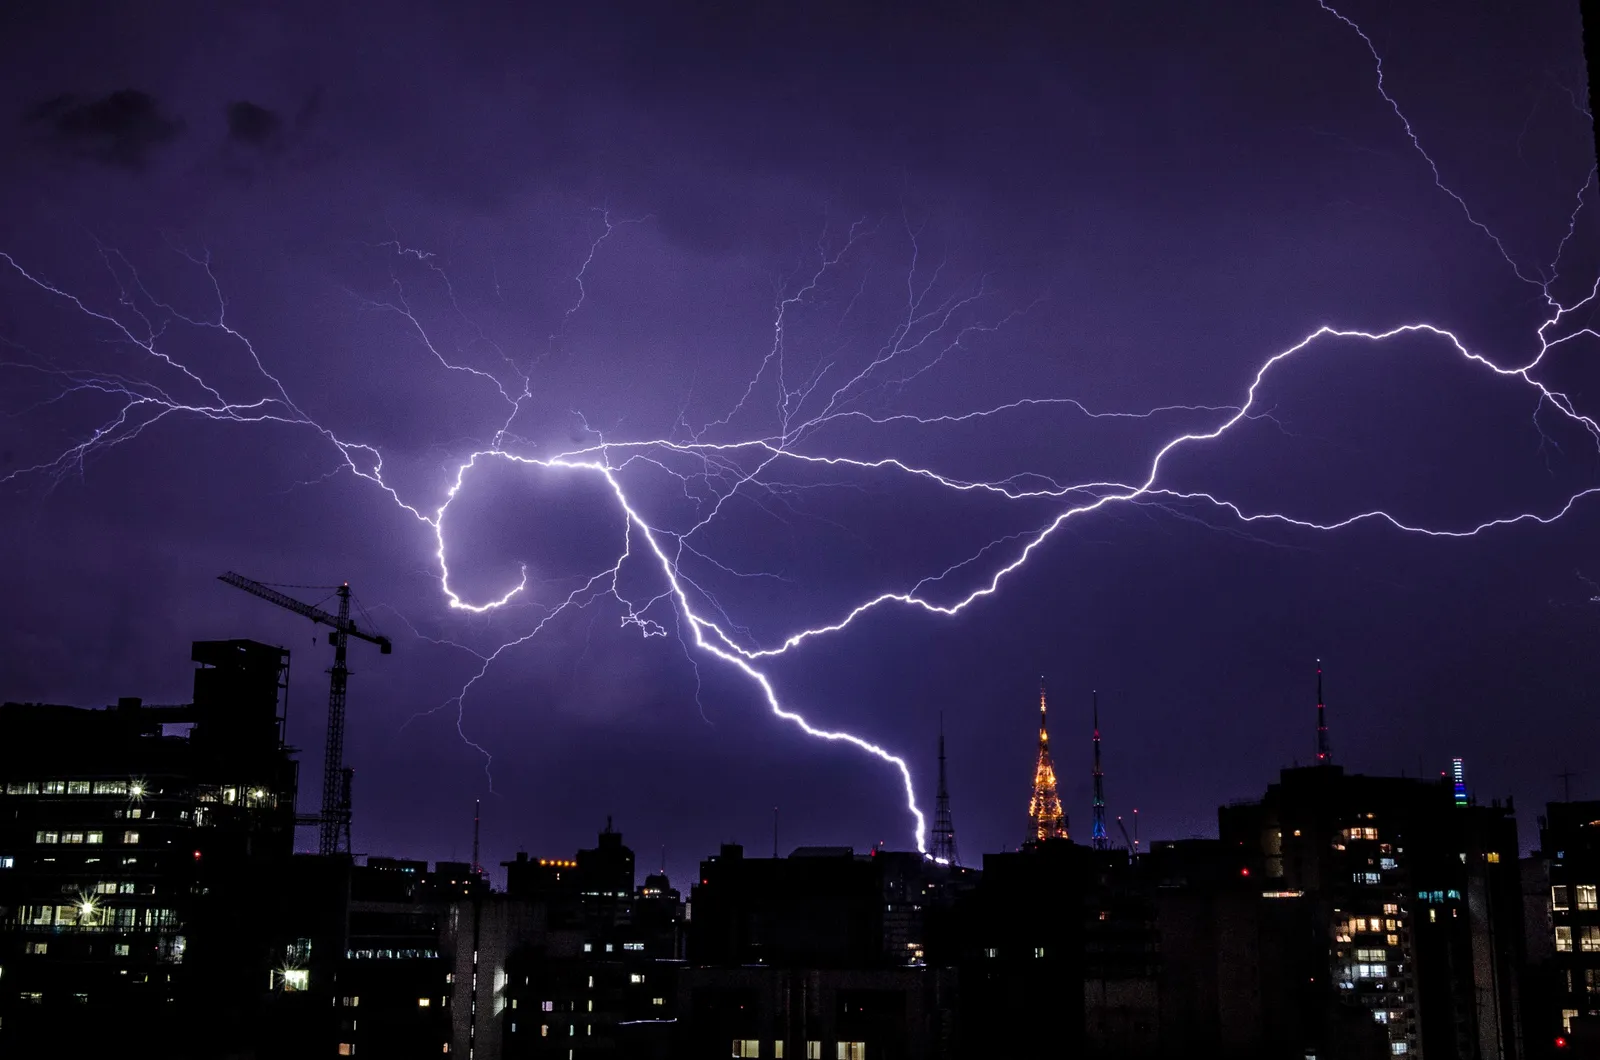 Record-Breaking Lightning Bolts Spark Excitement | Smart News| Smithsonian  Magazine